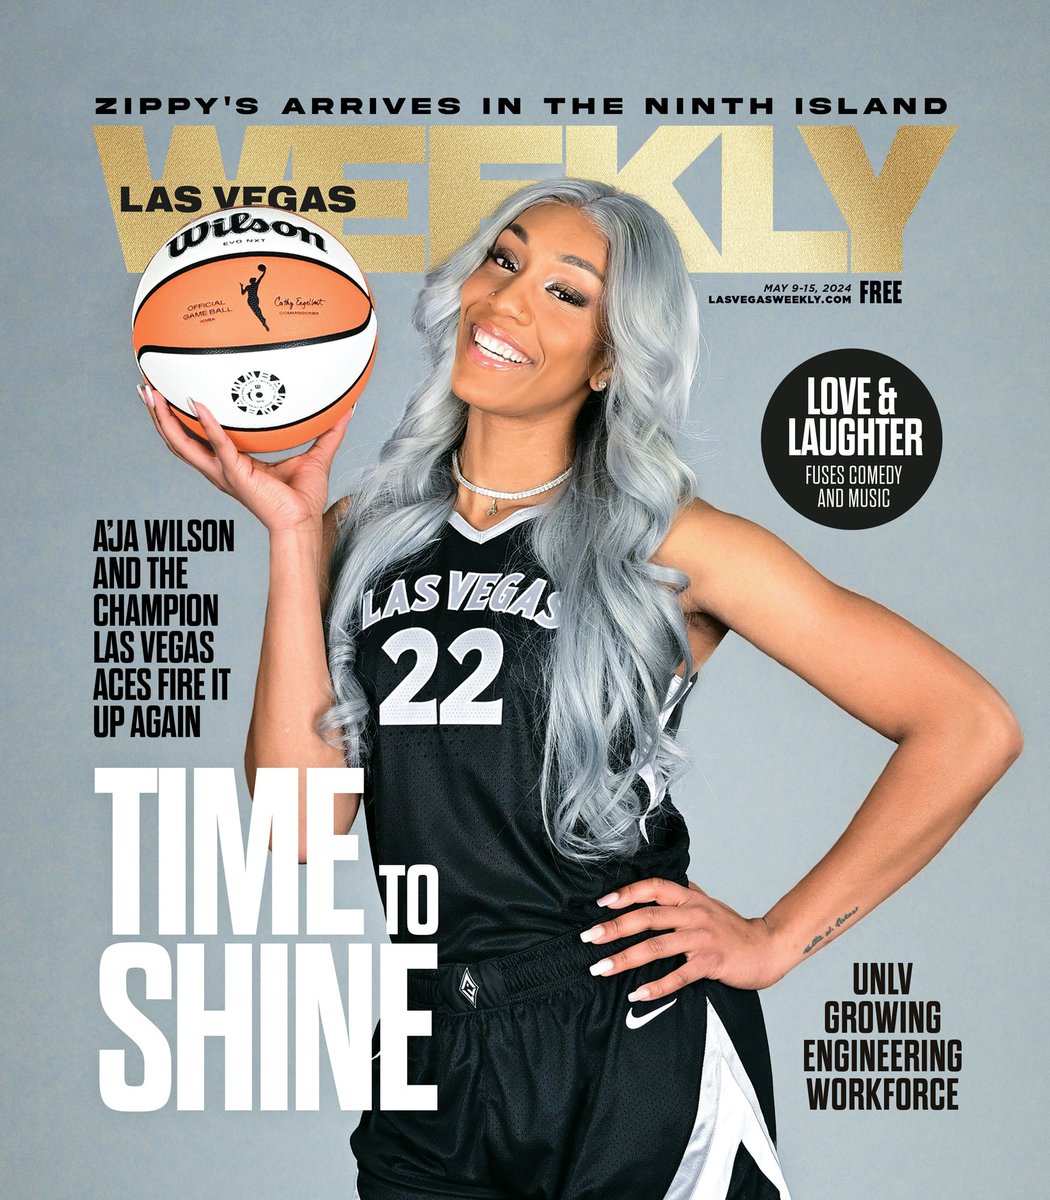 On this week's cover: A’ja Wilson, the first undeniable star of our major league sports era, leads the champion Las Vegas Aces into a new season. Photo: Courtesy/Las Vegas Aces bit.ly/4dwH31U